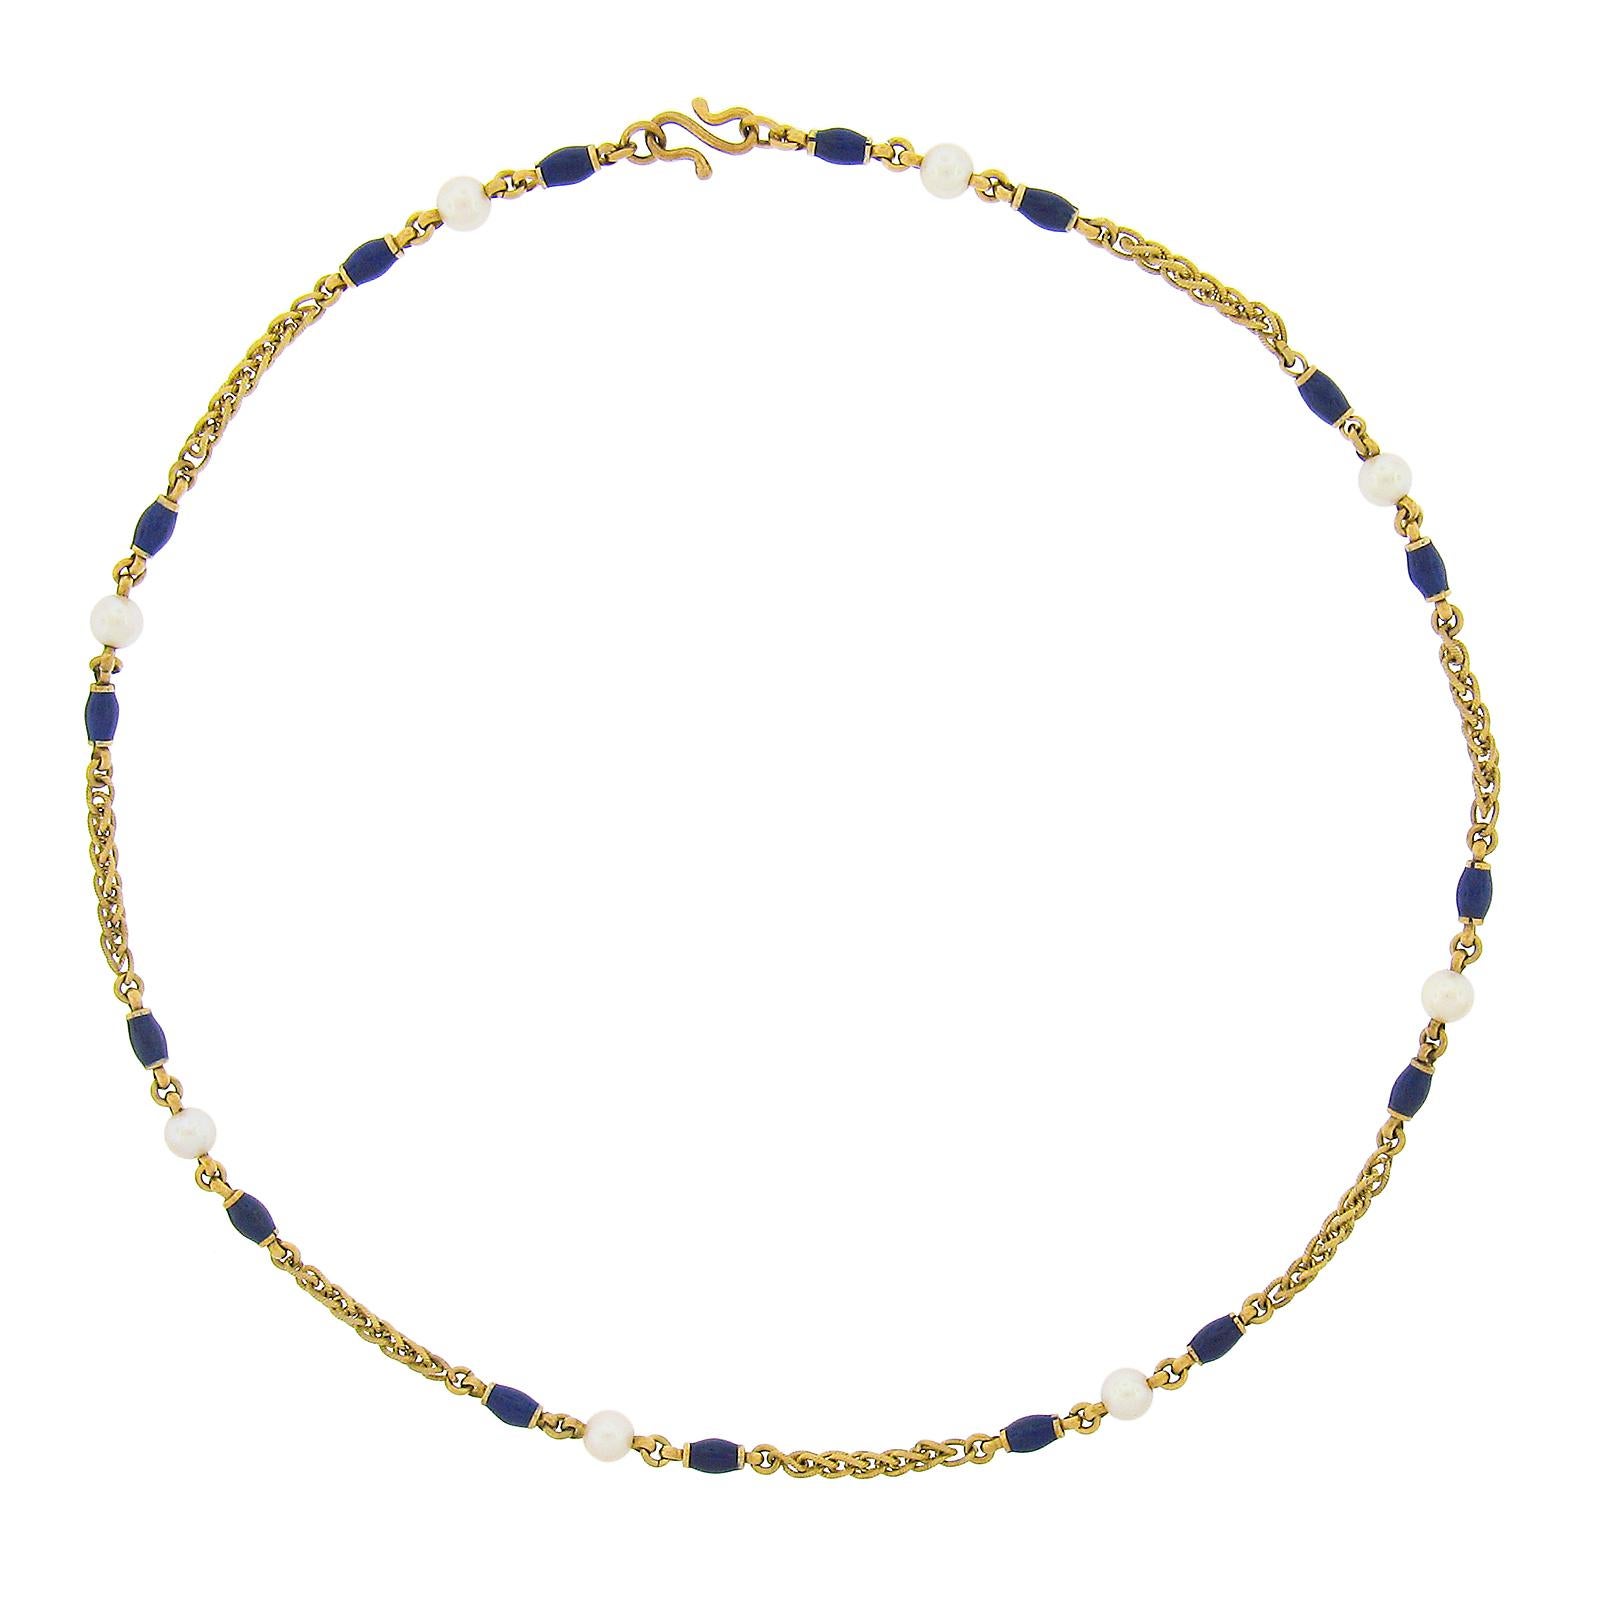 Vintage 18k Gold 4.8mm Pearl & Blue Enamel Bead on Textured Wheat Chain Necklace In Good Condition For Sale In Montclair, NJ